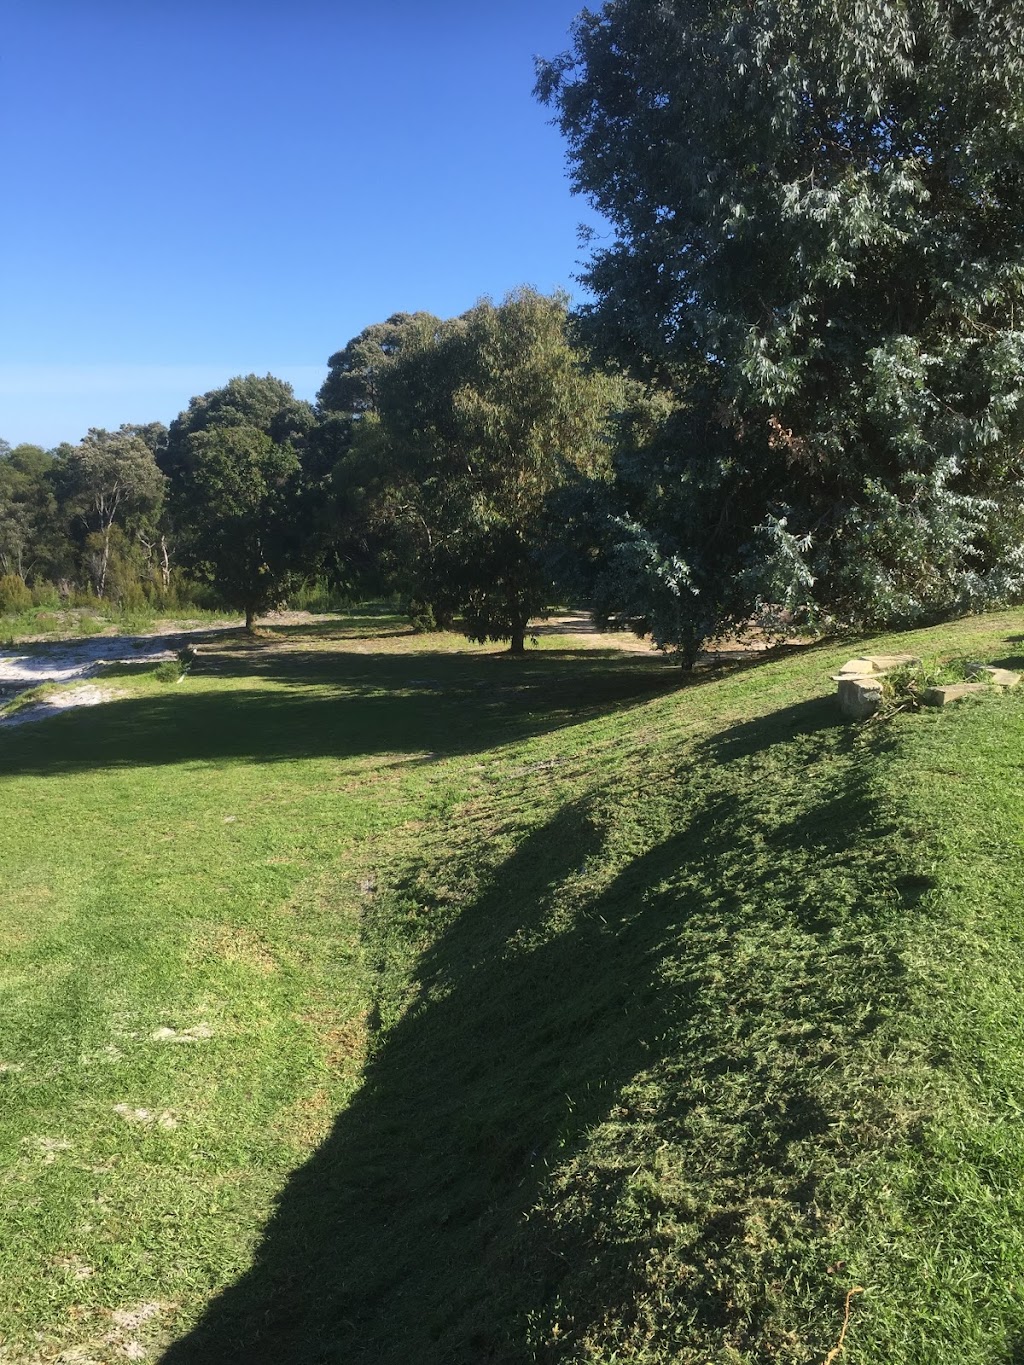 Full Circle Mowing | general contractor | 71 Tennessee Rd N, Lowlands WA 6330, Australia | 0429451235 OR +61 429 451 235